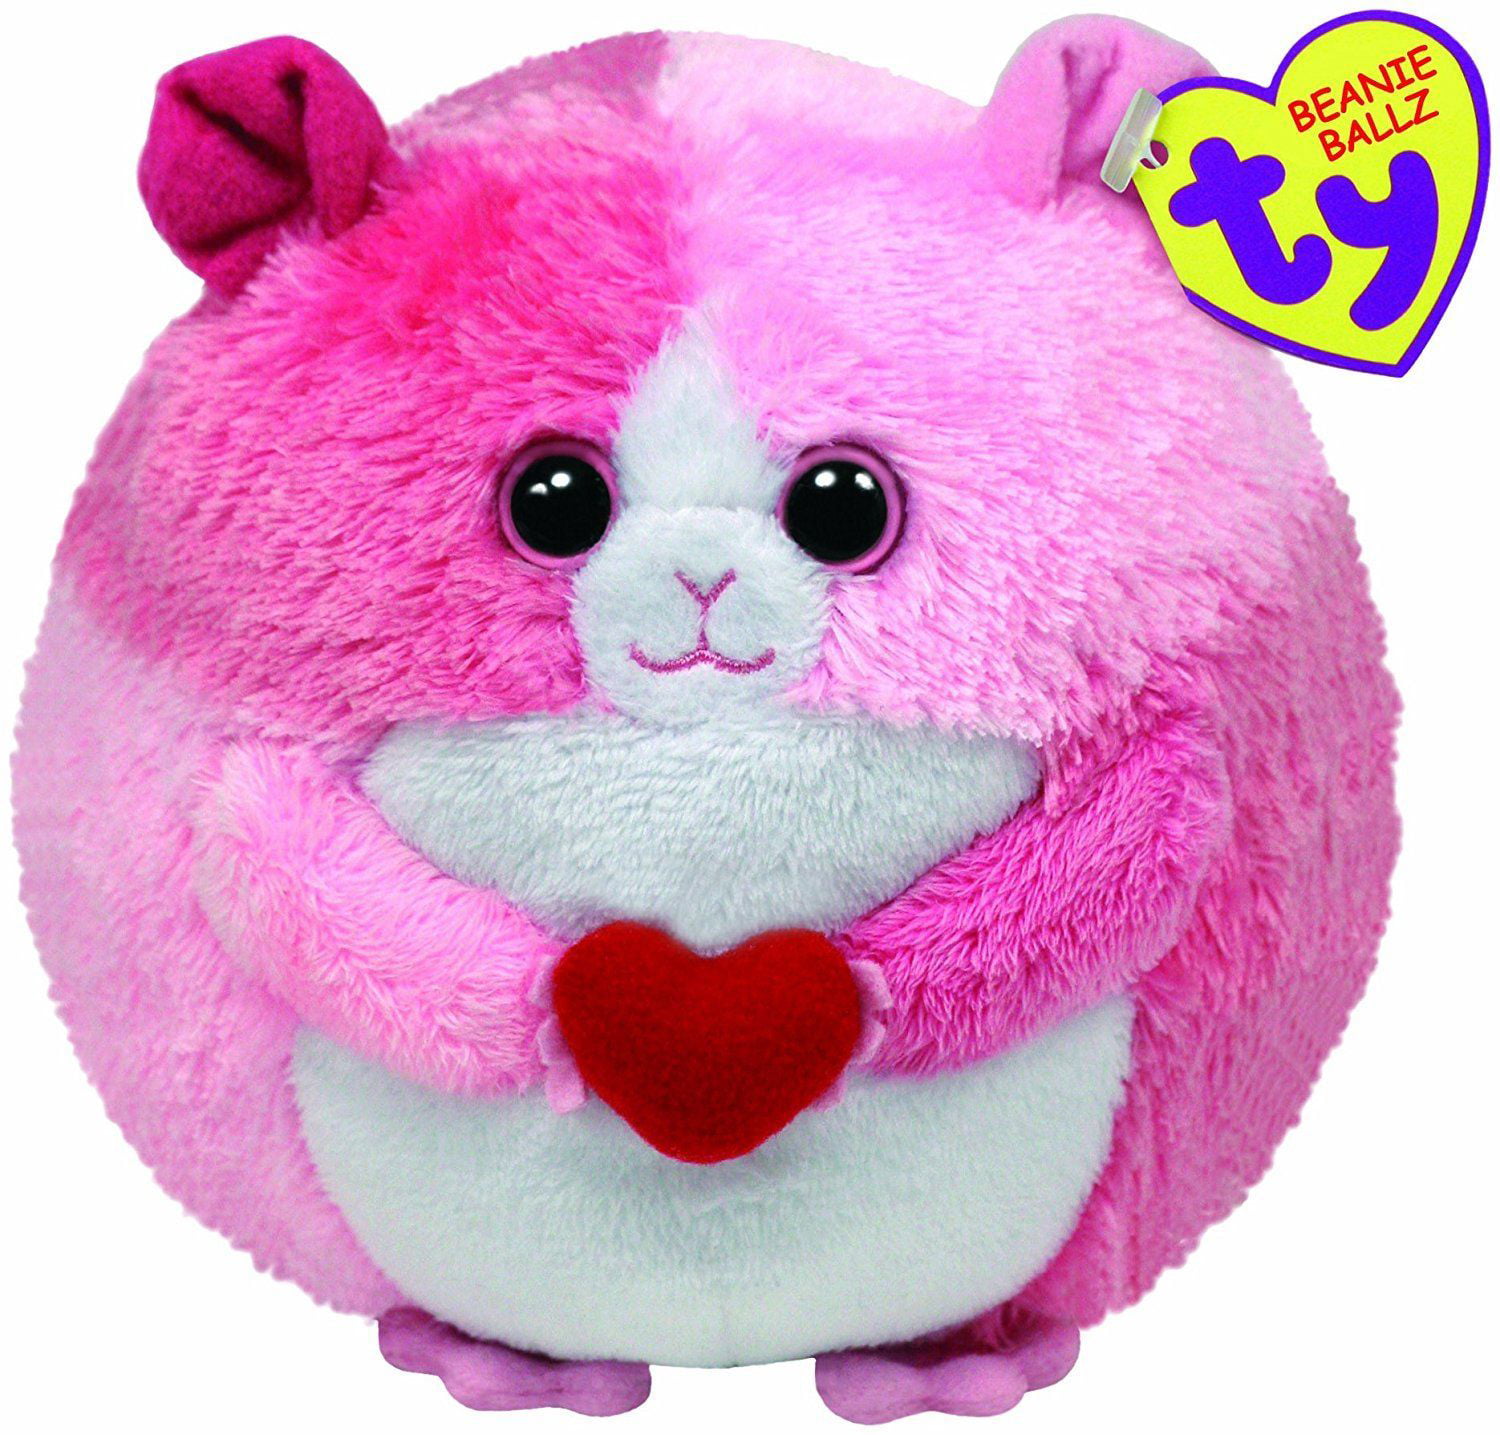 Ty Original Beanie Babies Collection Pinky Hamster Guinea Pig 2009 Pink Plush for sale online 